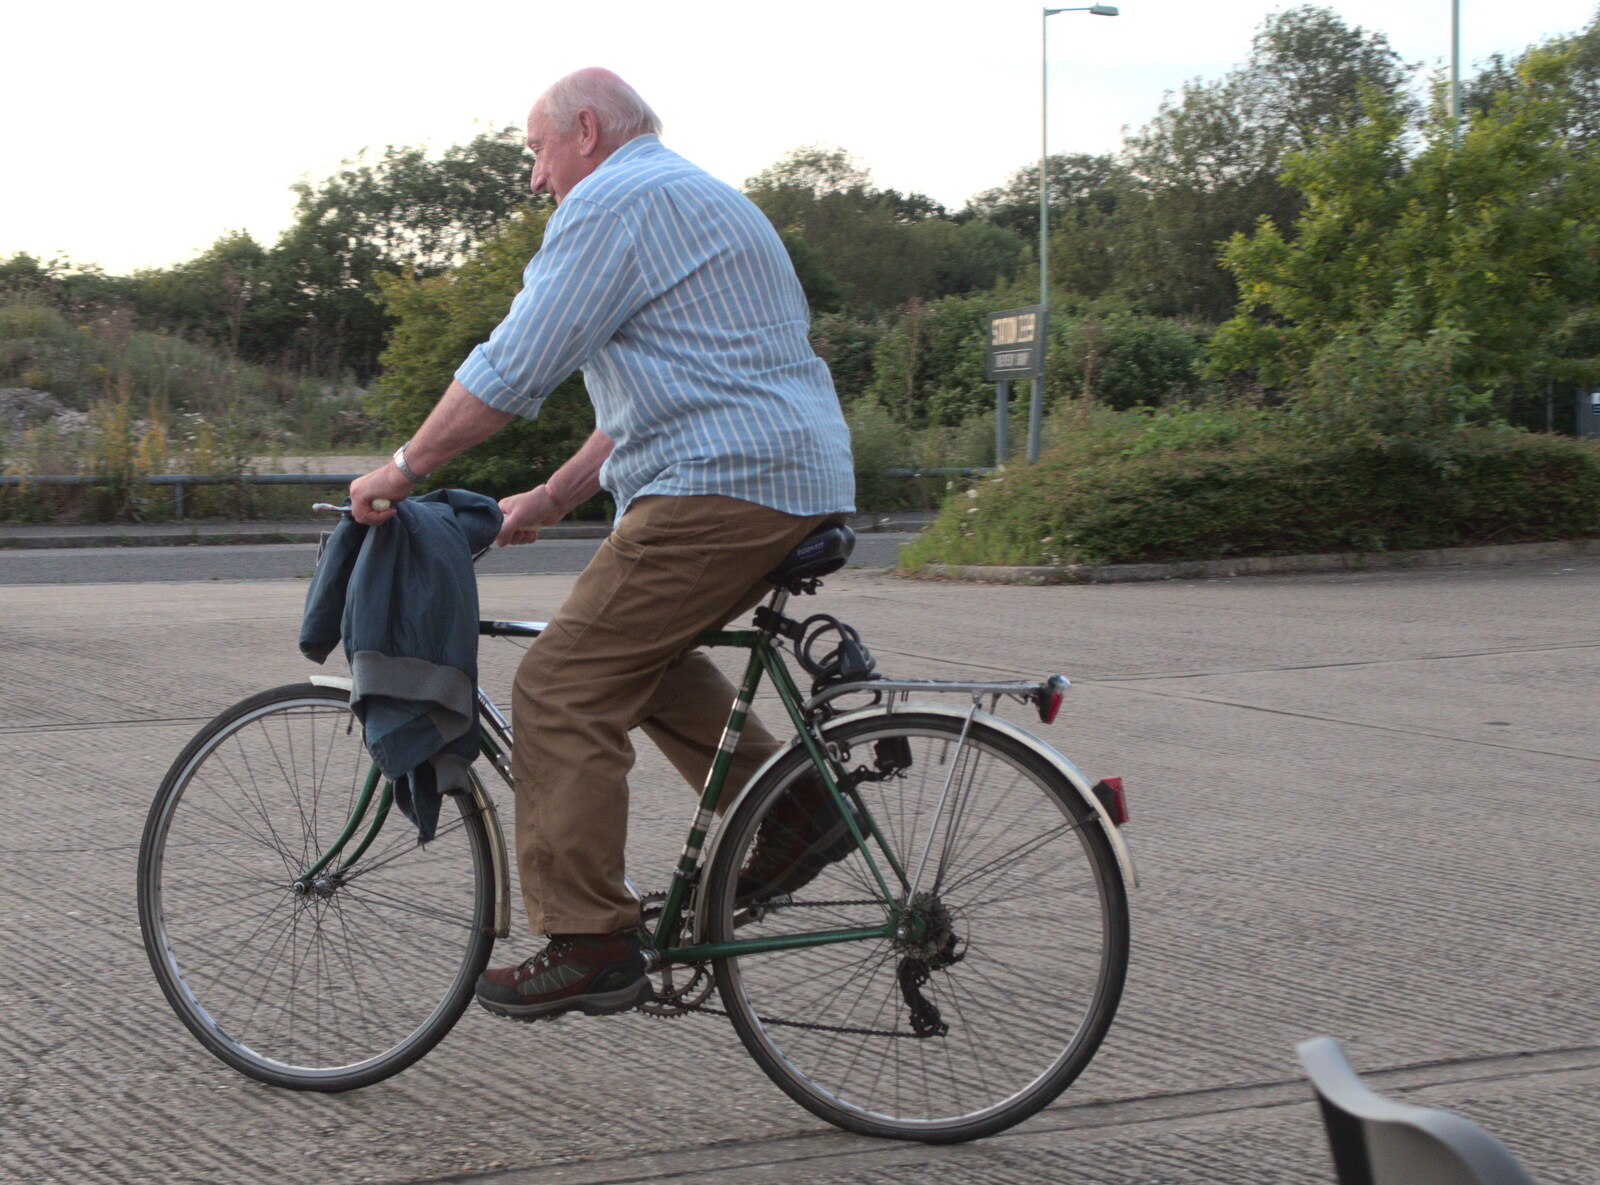 Mick heads off on his bike from The BSCC at Redgrave and Station 119, Eye, Suffolk - 17th July 2020